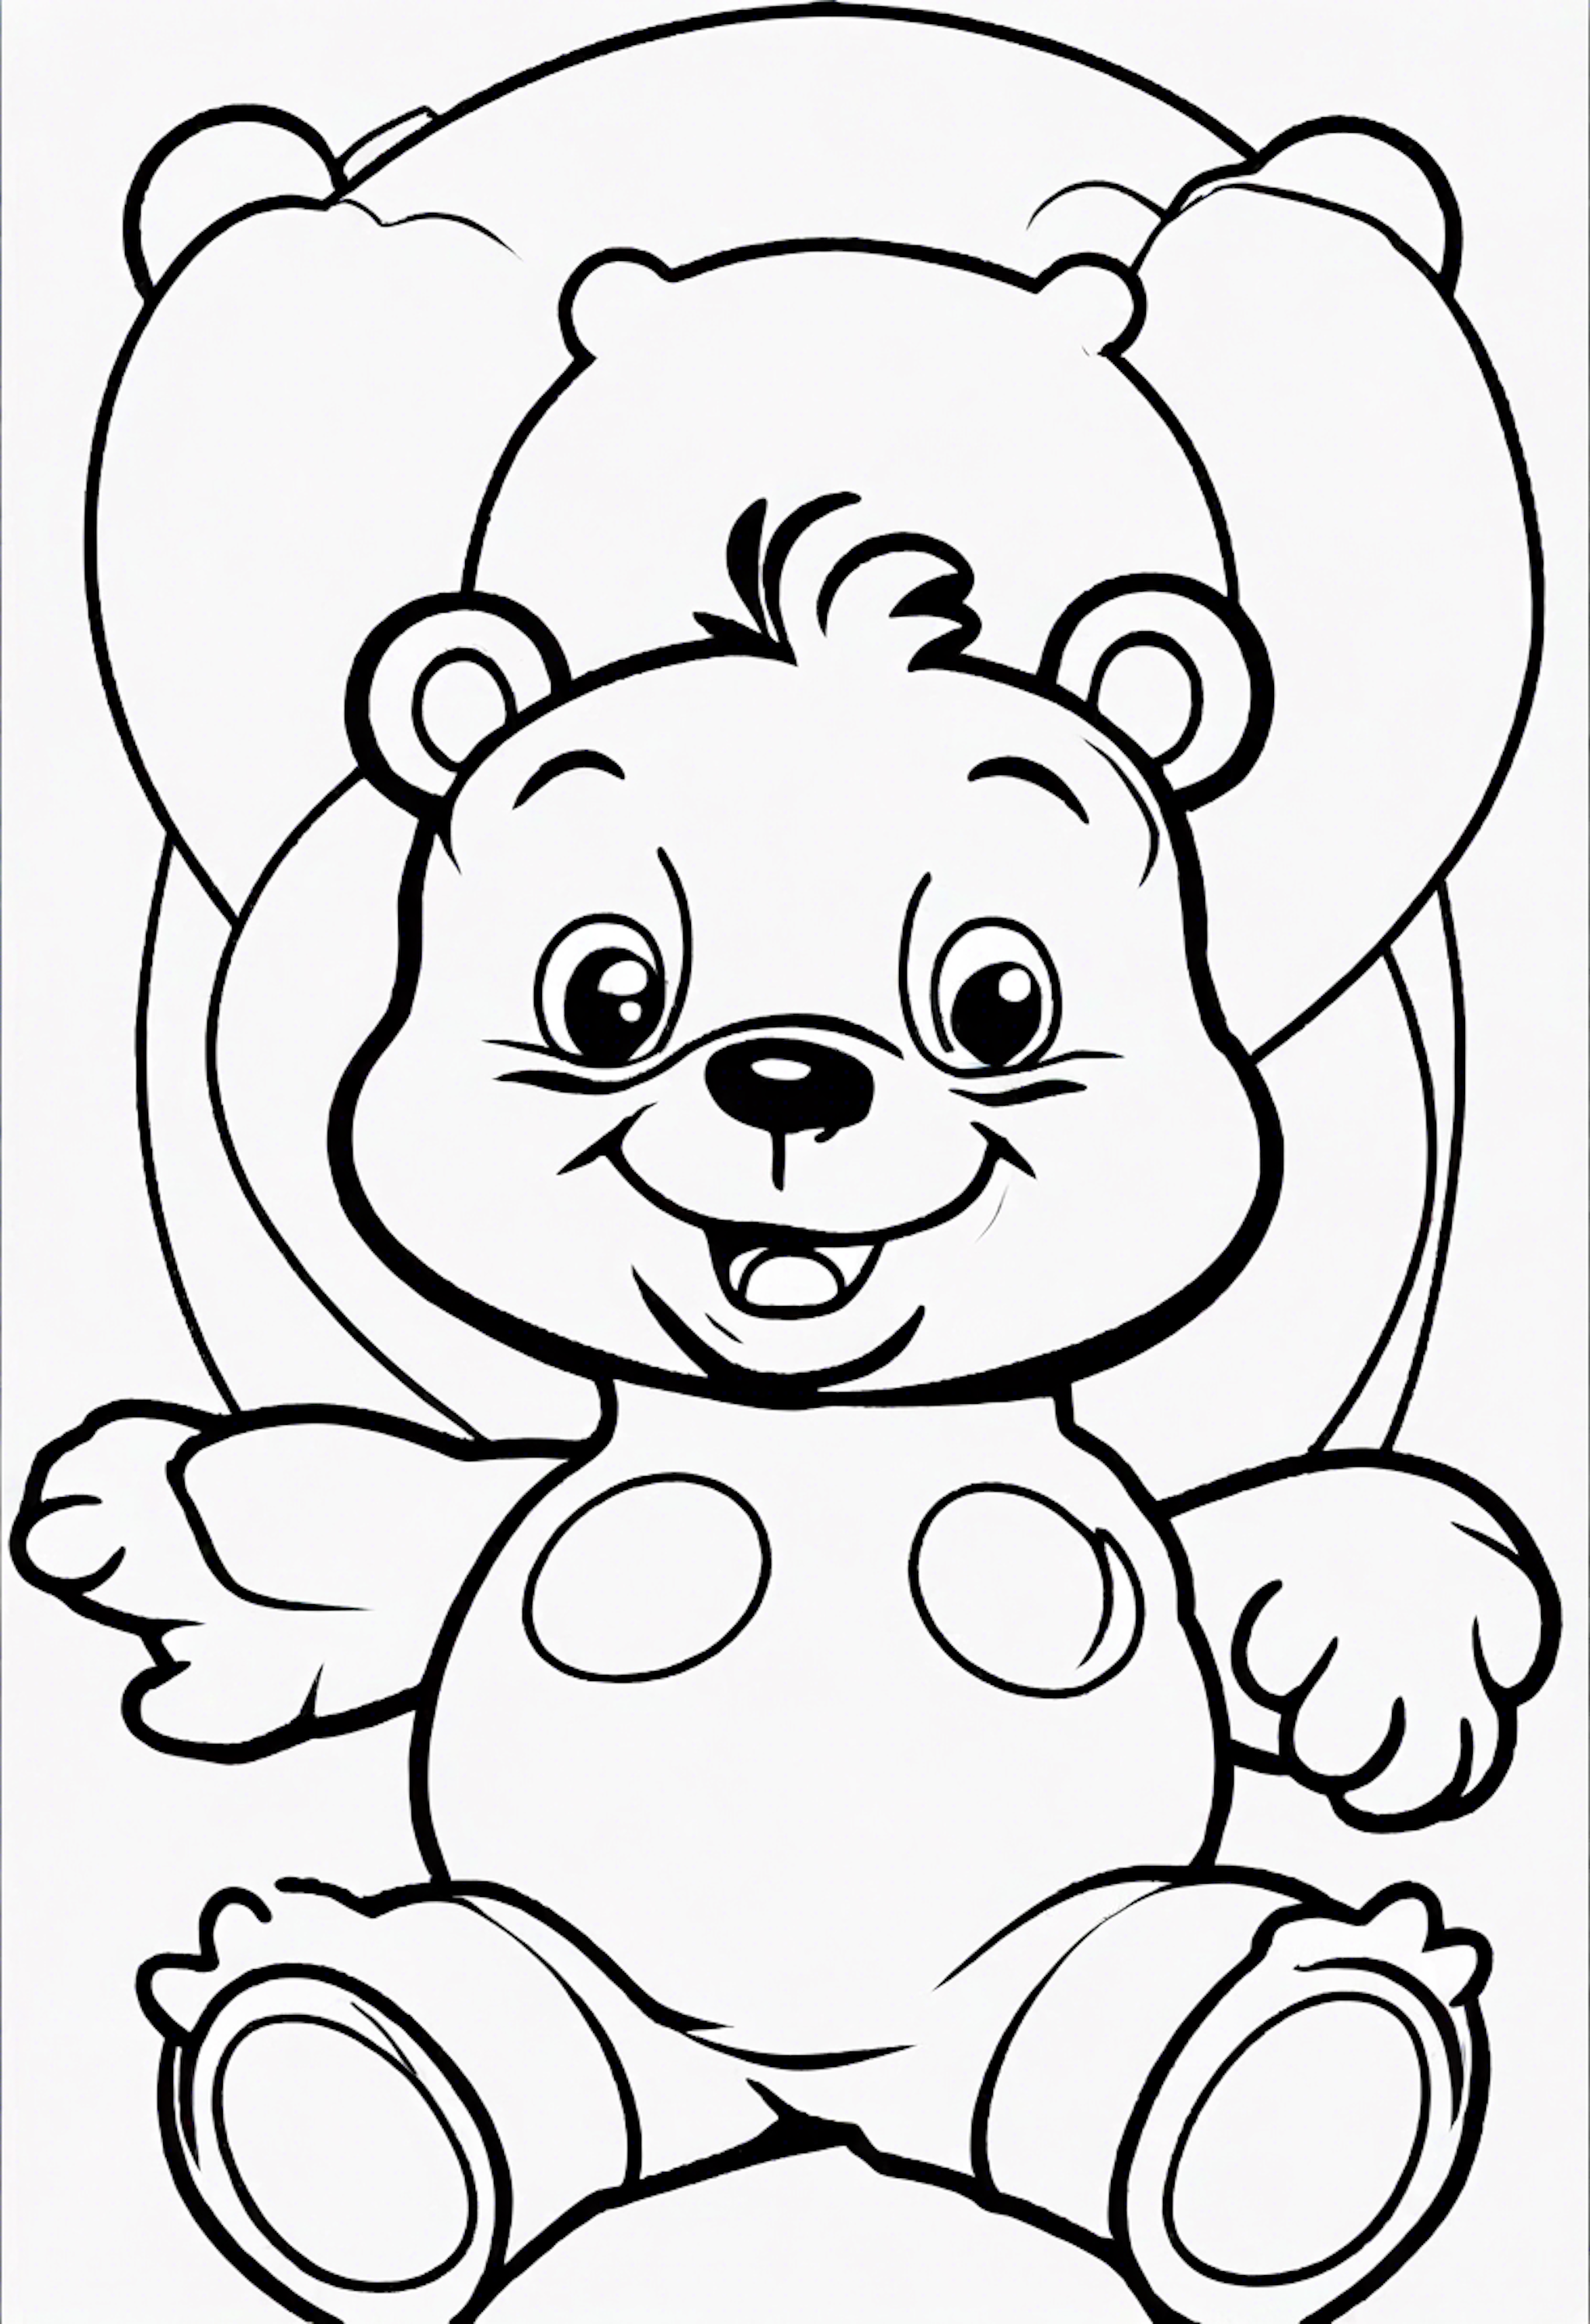 A coloring page for 1 Care Bear coloring pages